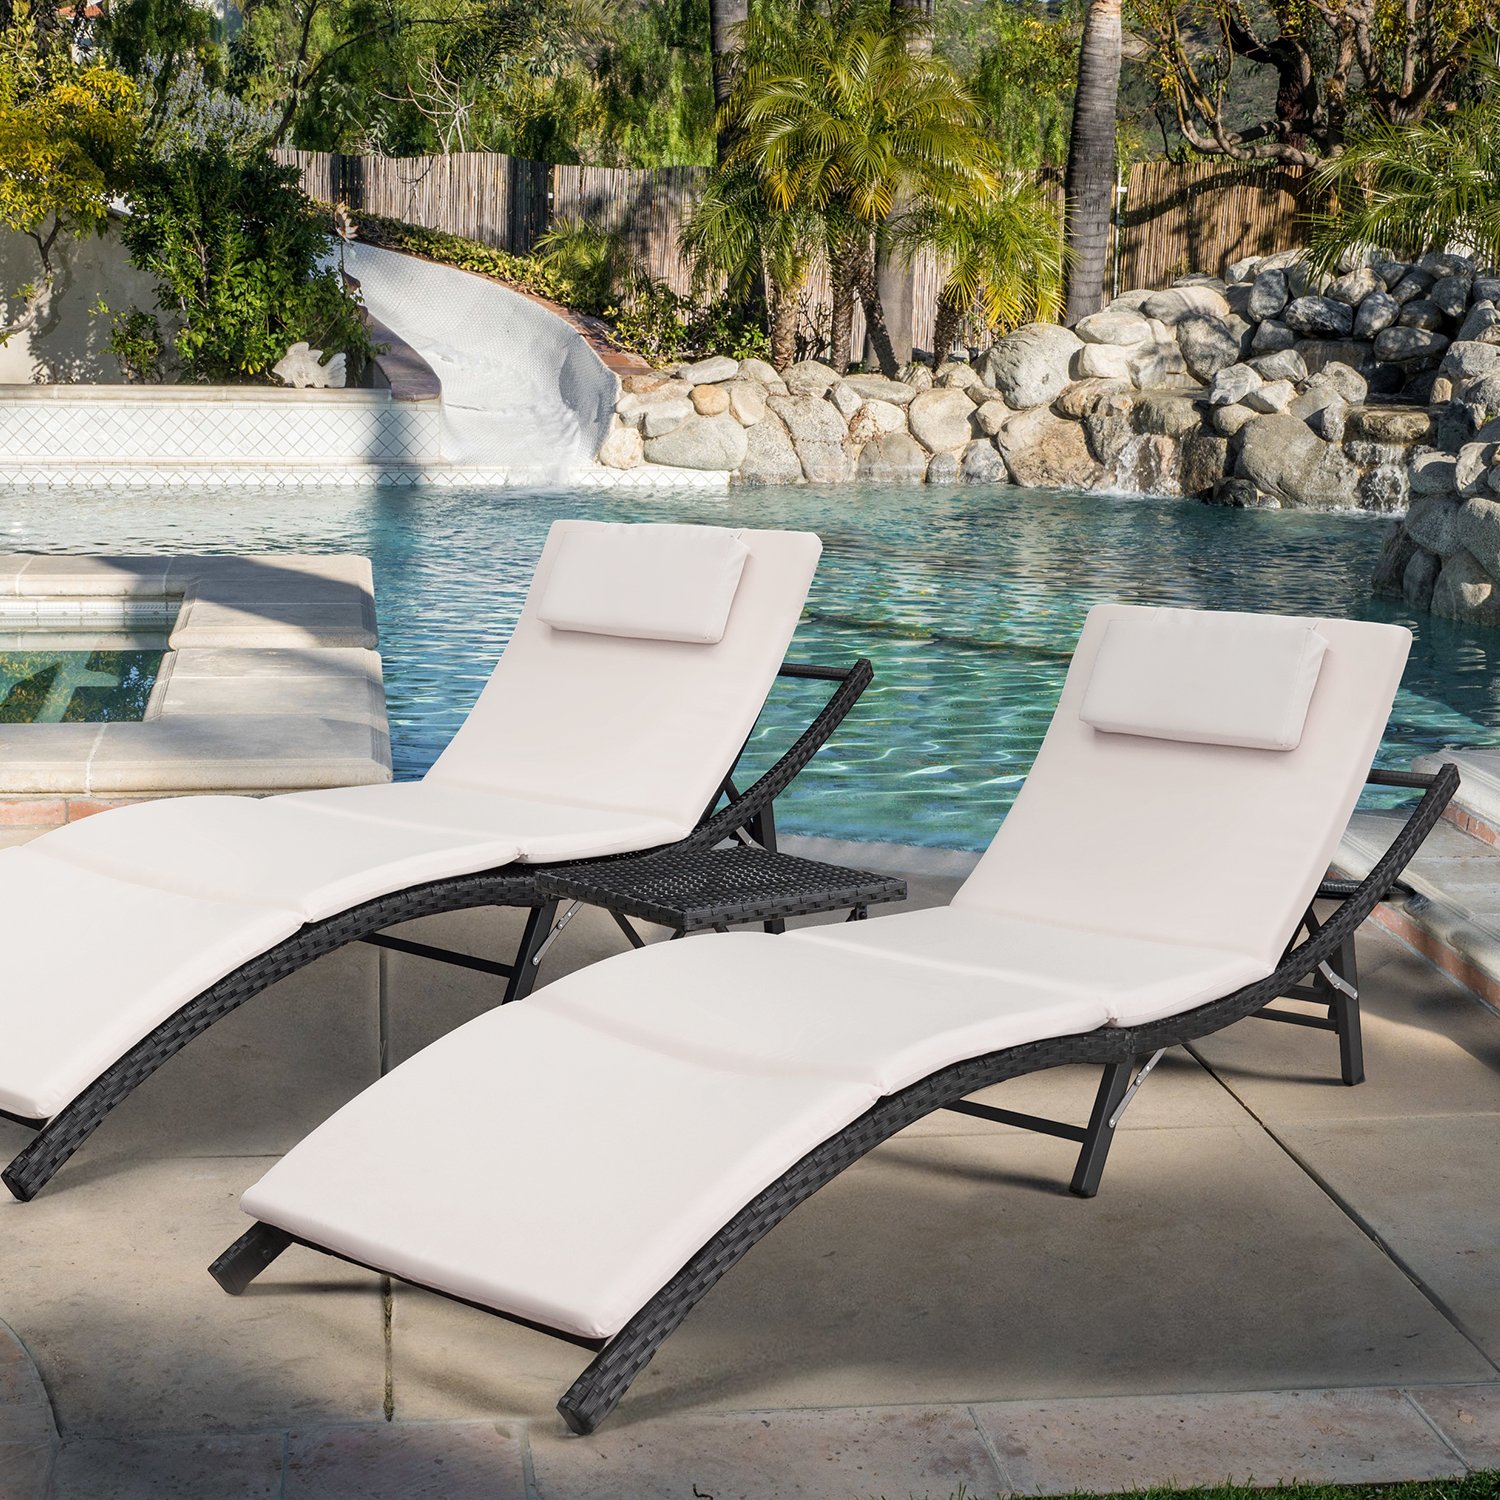 Top 15 Best Folding Lounge Chairs Of 2022 Reviews Sport & Outdoor